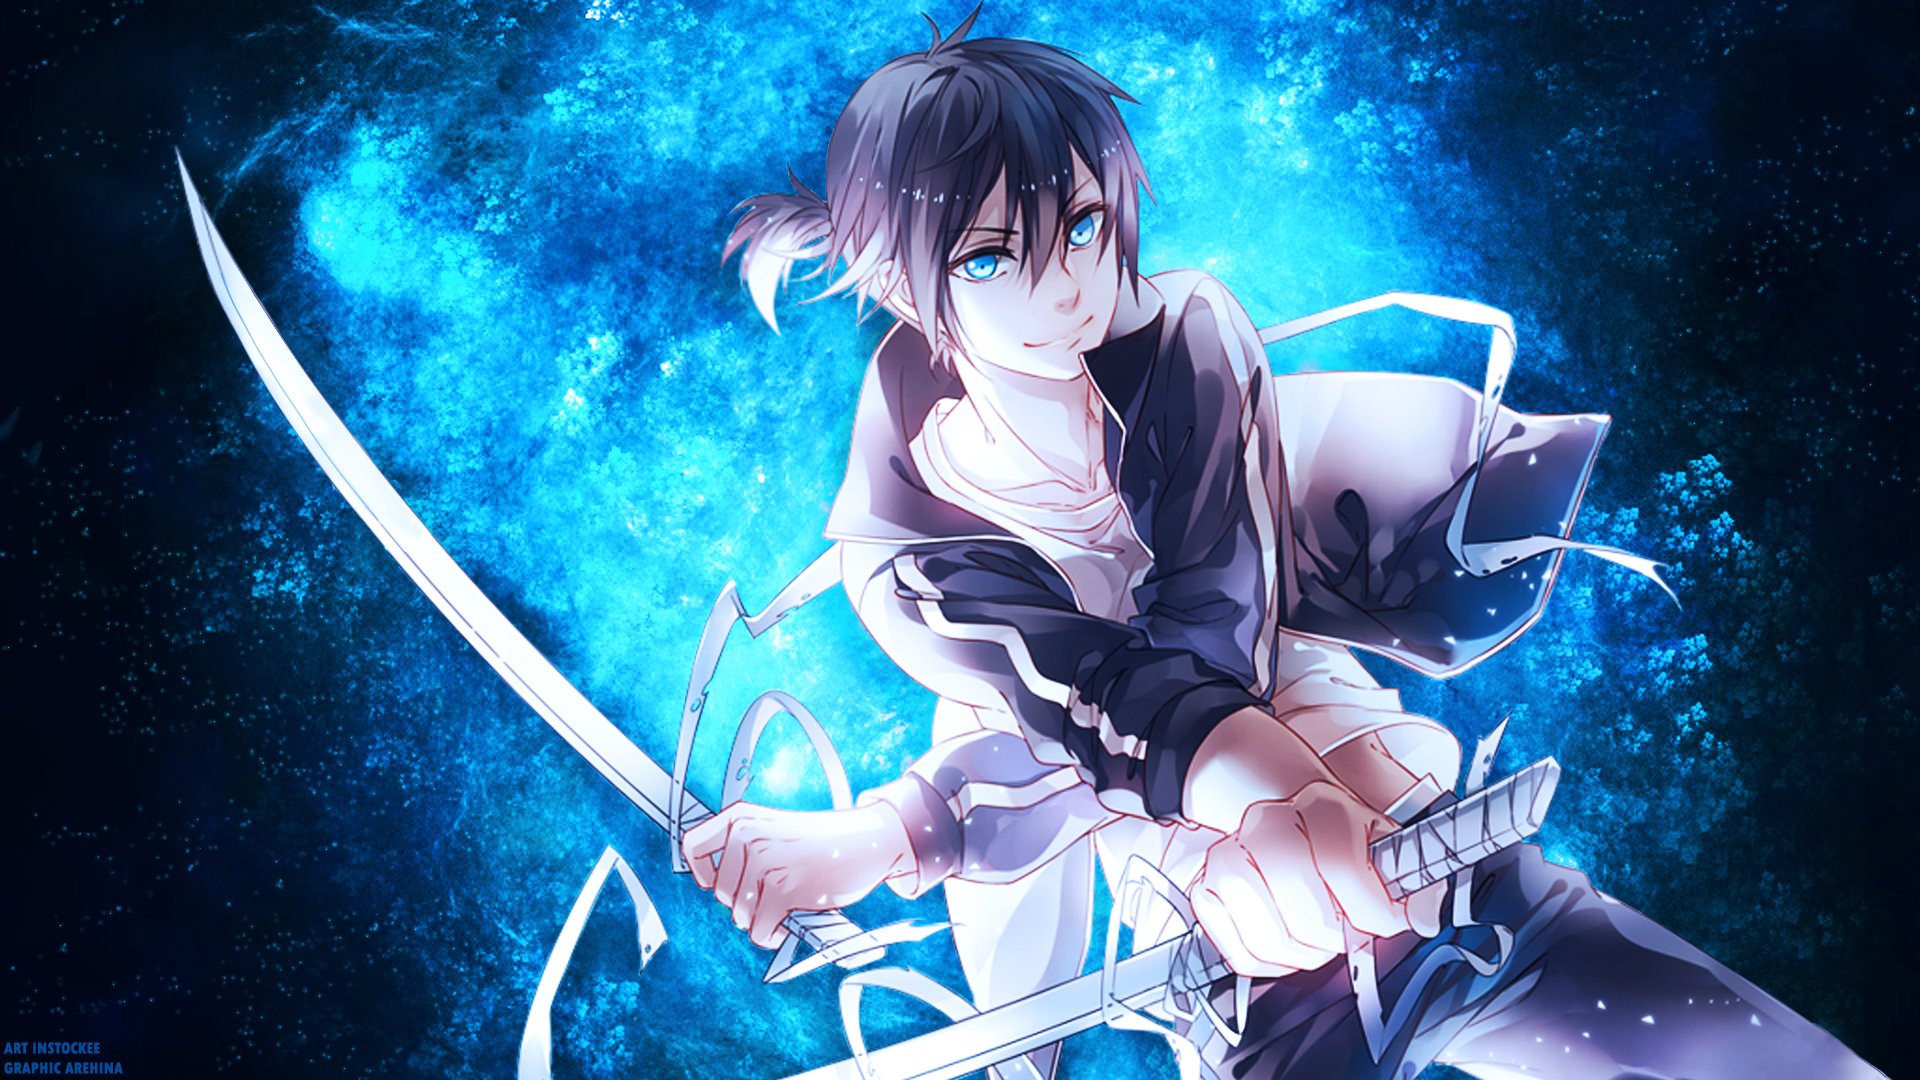 2. "Yato" from Noragami - wide 5